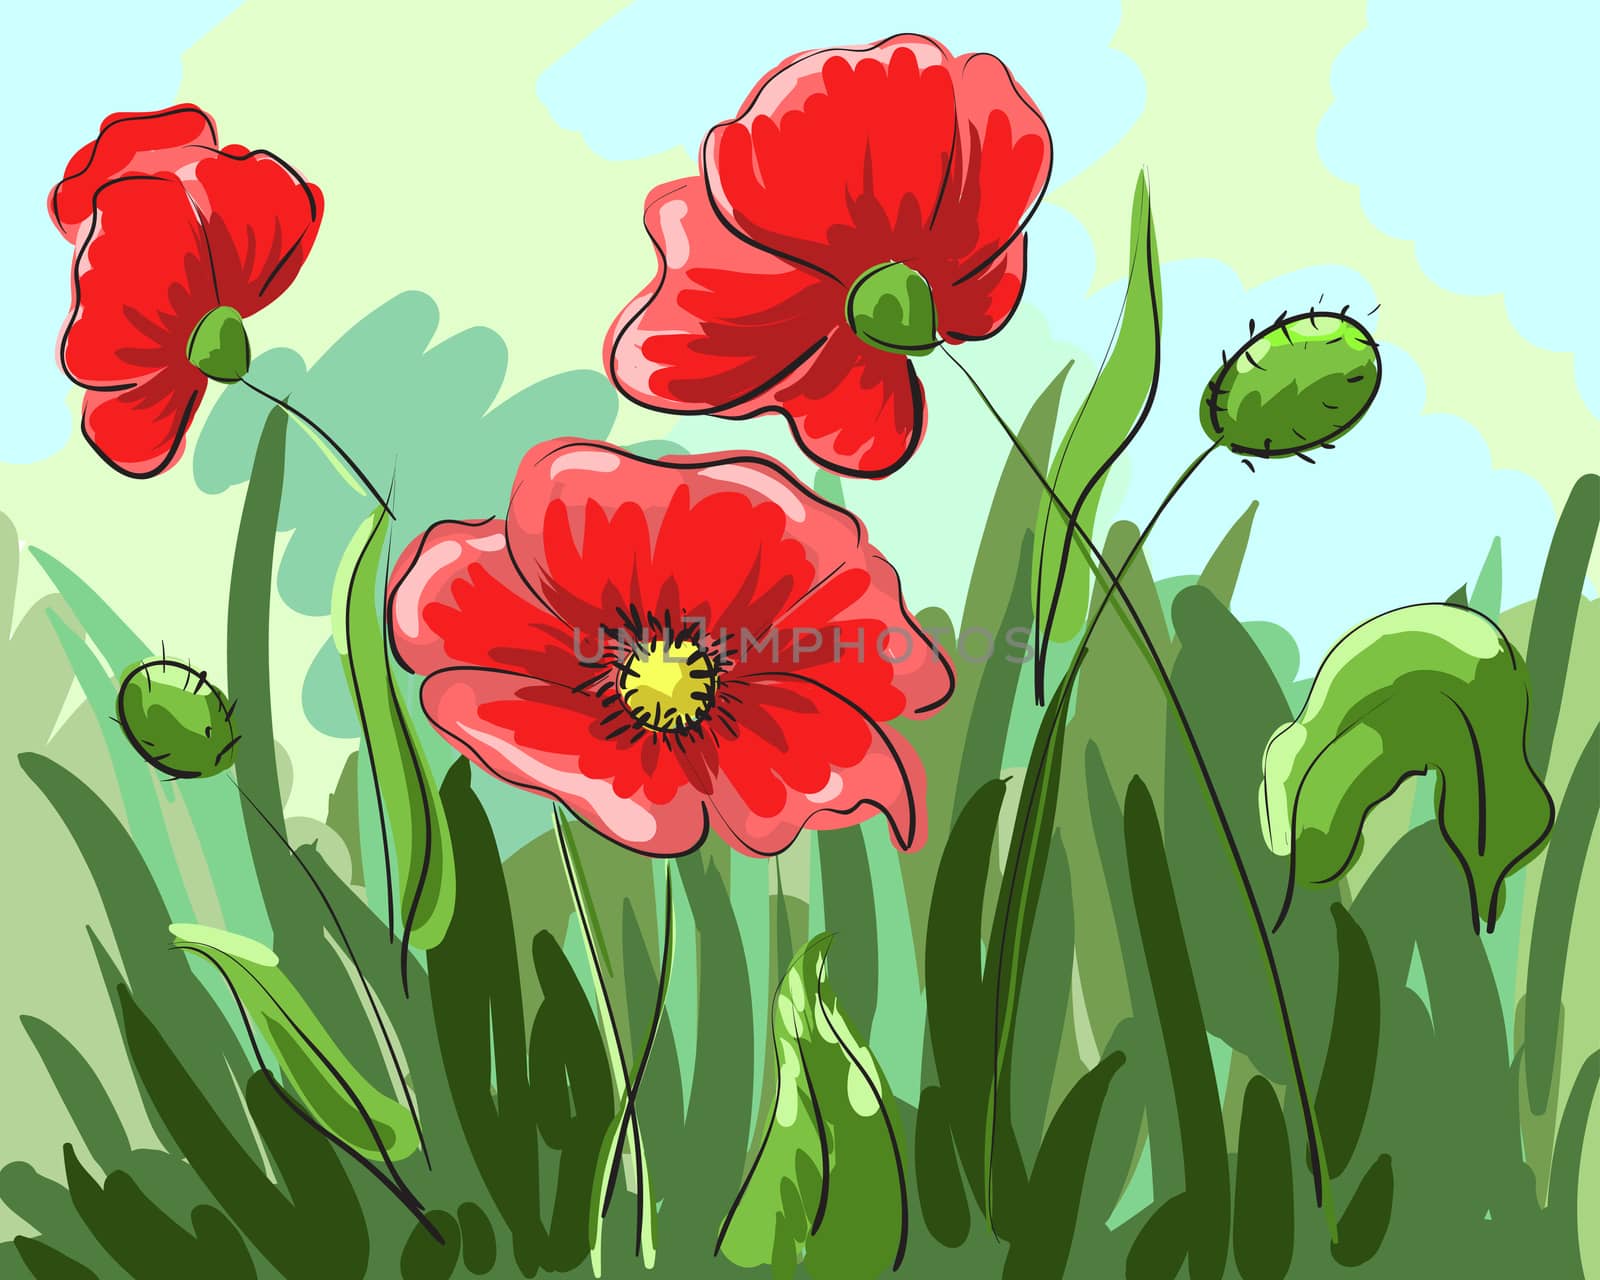 red poppies painted by hand grow on the field with green leaves. illustration